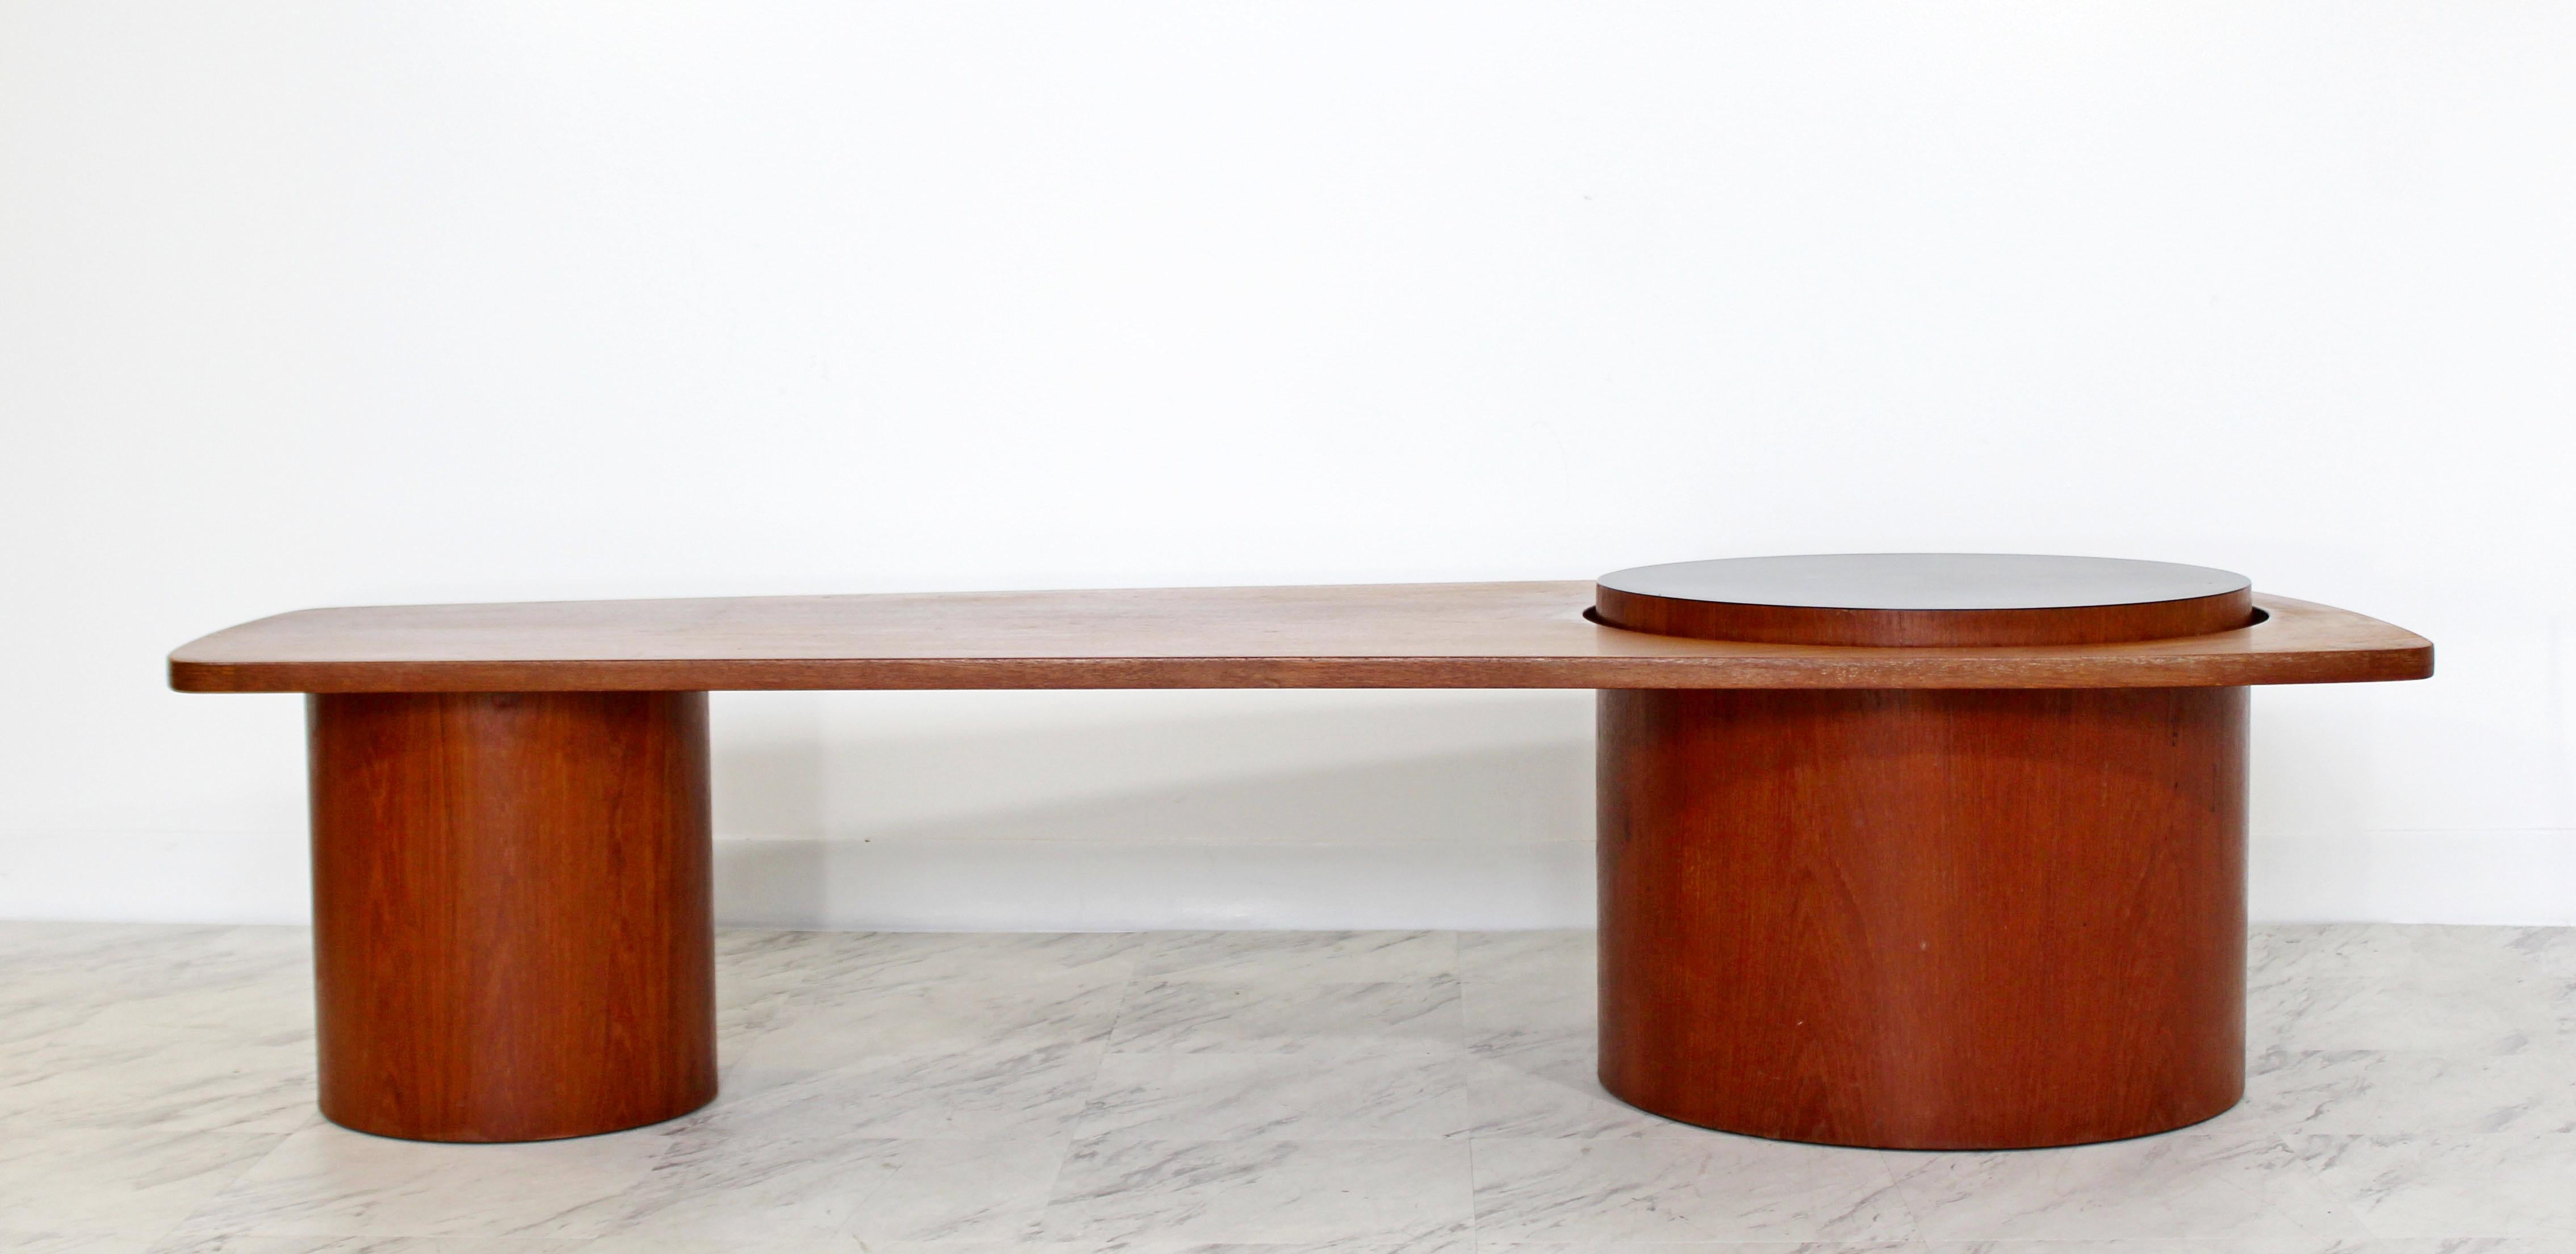 For your consideration is a stunning, long coffee table, with a free-form teak design and round bases, in the Danish style, circa the 1960s. In very good condition. The dimensions are 67